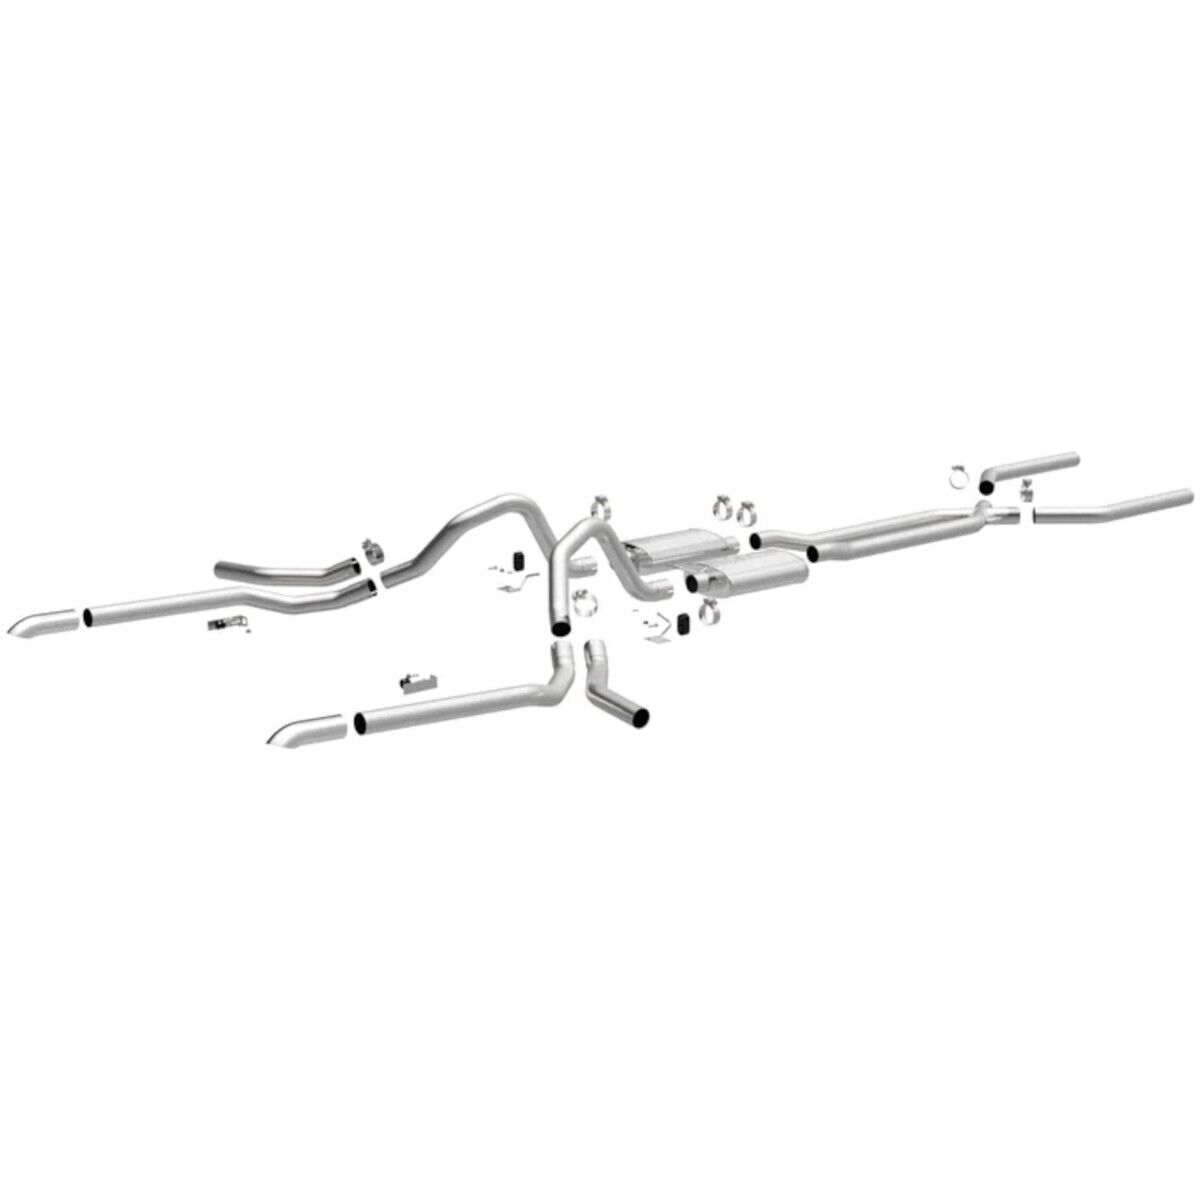 MagnaFlow Crossmember Back Performance  Exhaust System For 65-69 Chevy Impala V8